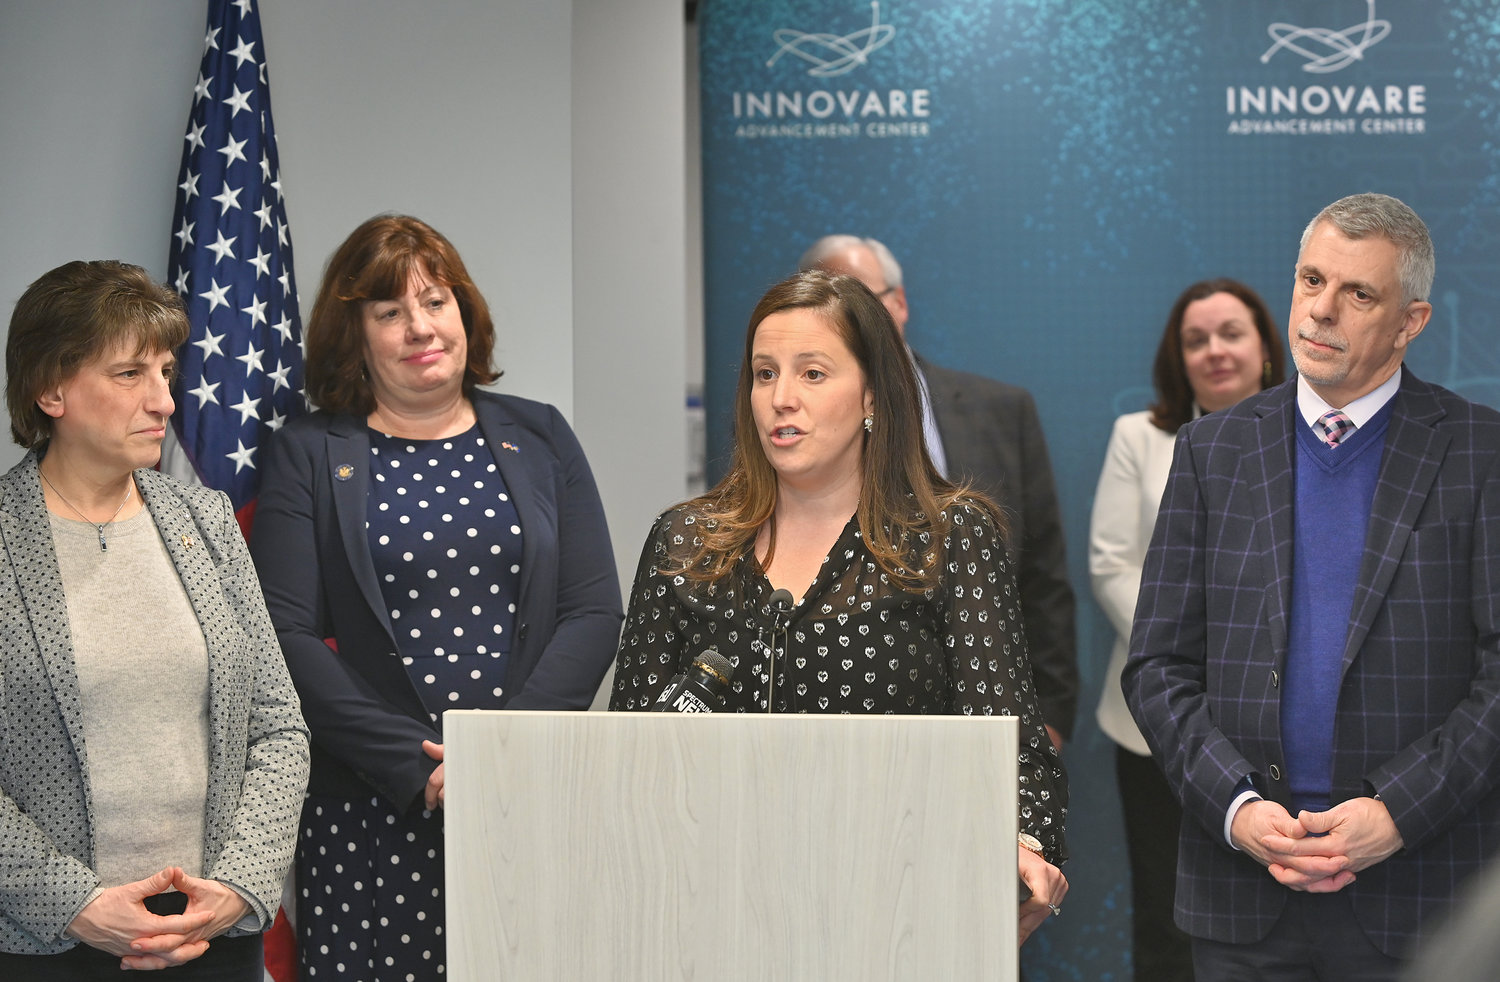 NEW DISTRICT — Congresswoman Elise Stefanick speaks to reporters with Rome Mayor Izzo, Assemblywoman Marianne Buttenschon, and Oneida County Executive Anthony Picente in attendance during her tour of Rome Laboratories on Tuesday.